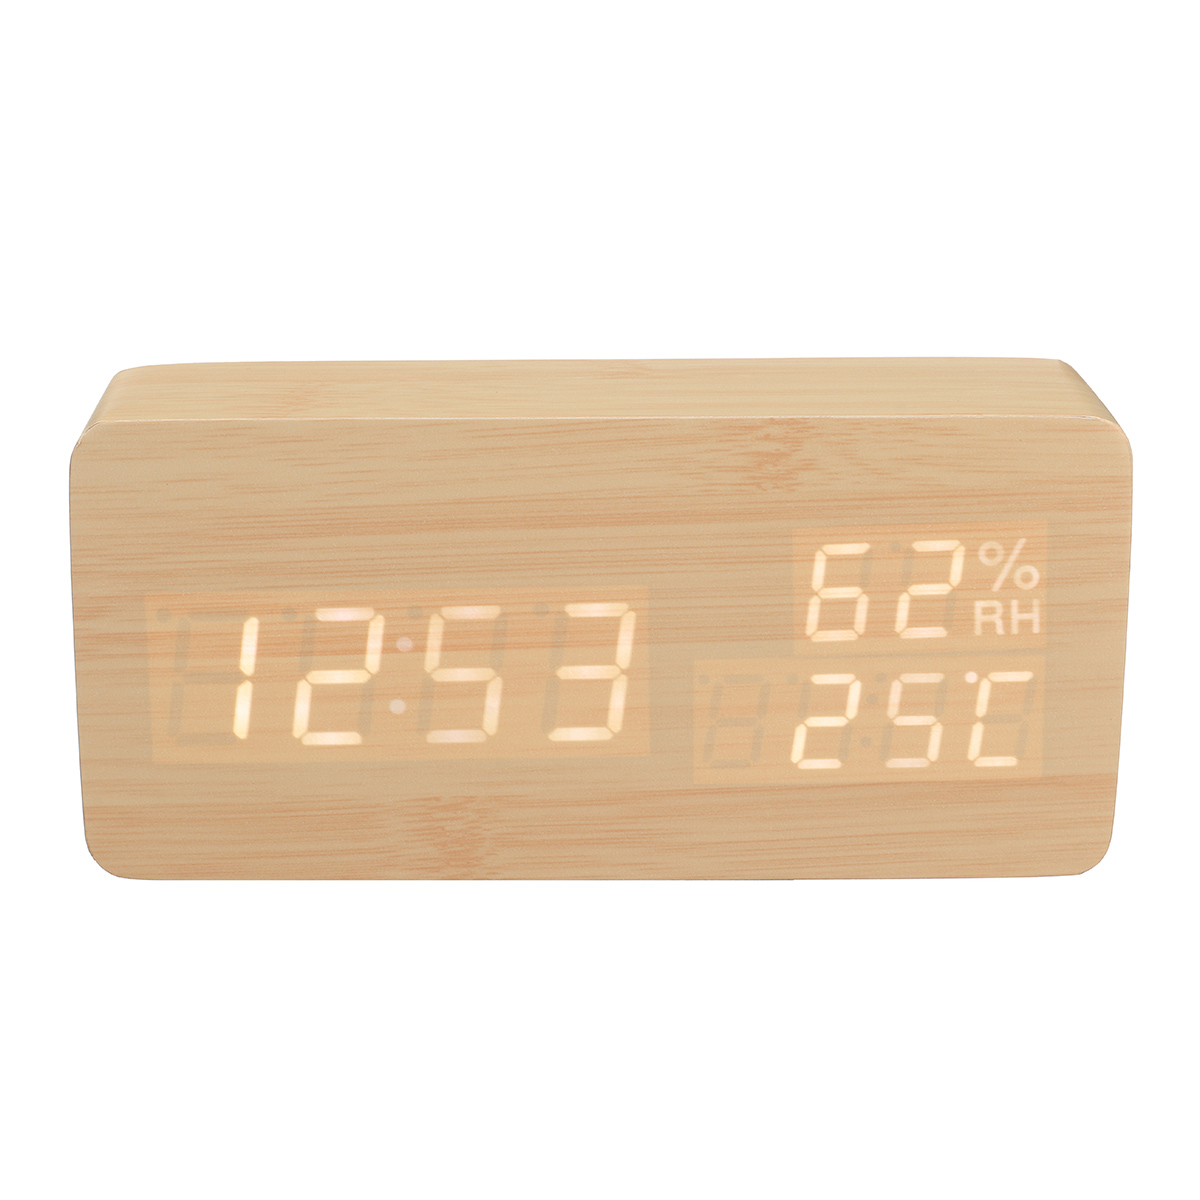 Modern-Wooden-Wood-Digital-Thermometer-USB-Charger-LED-Desk-Alarm-Wireless-Clock-1739446-10